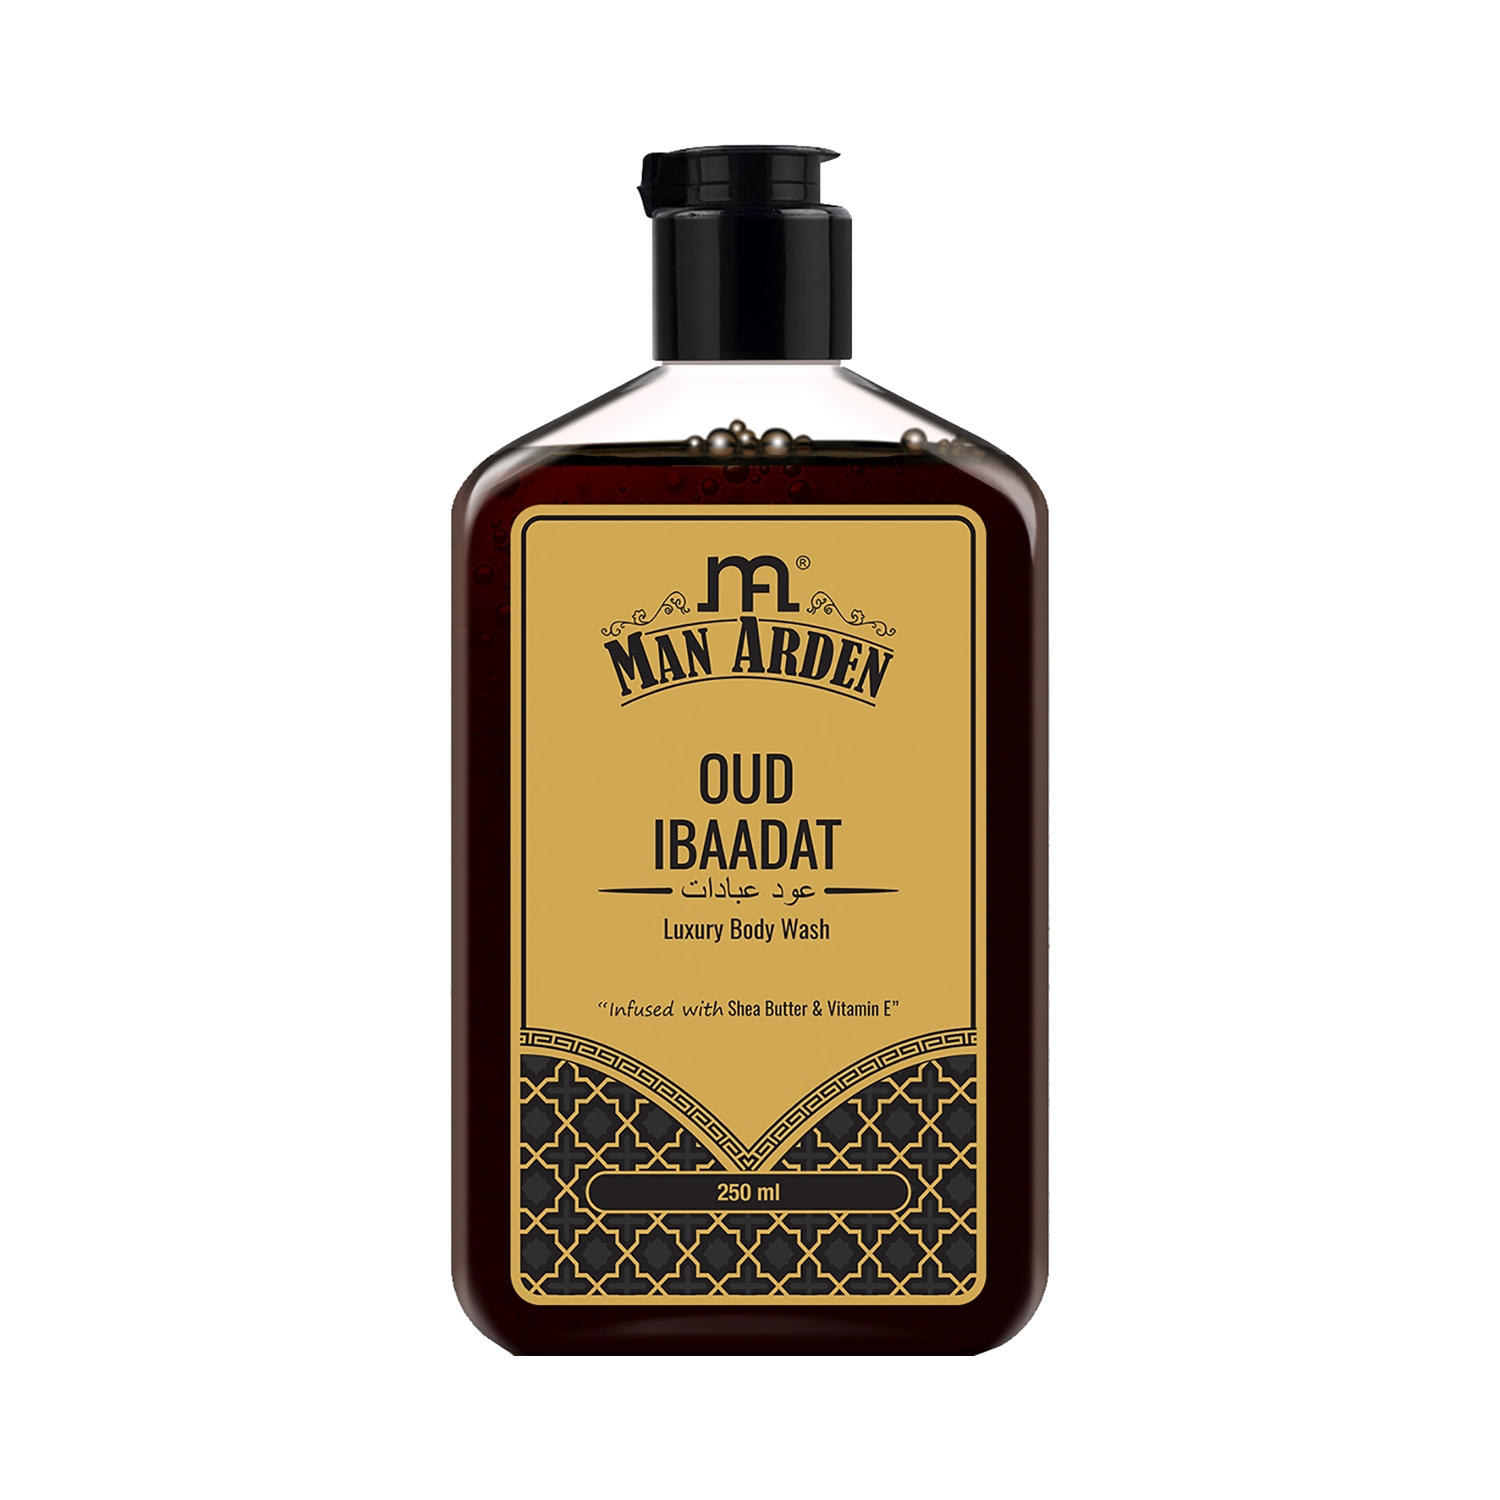 Man Arden | Man Arden Oud Ibaadat Luxury Body Wash Infused With Shea Butter & Vitamin E (250ml)